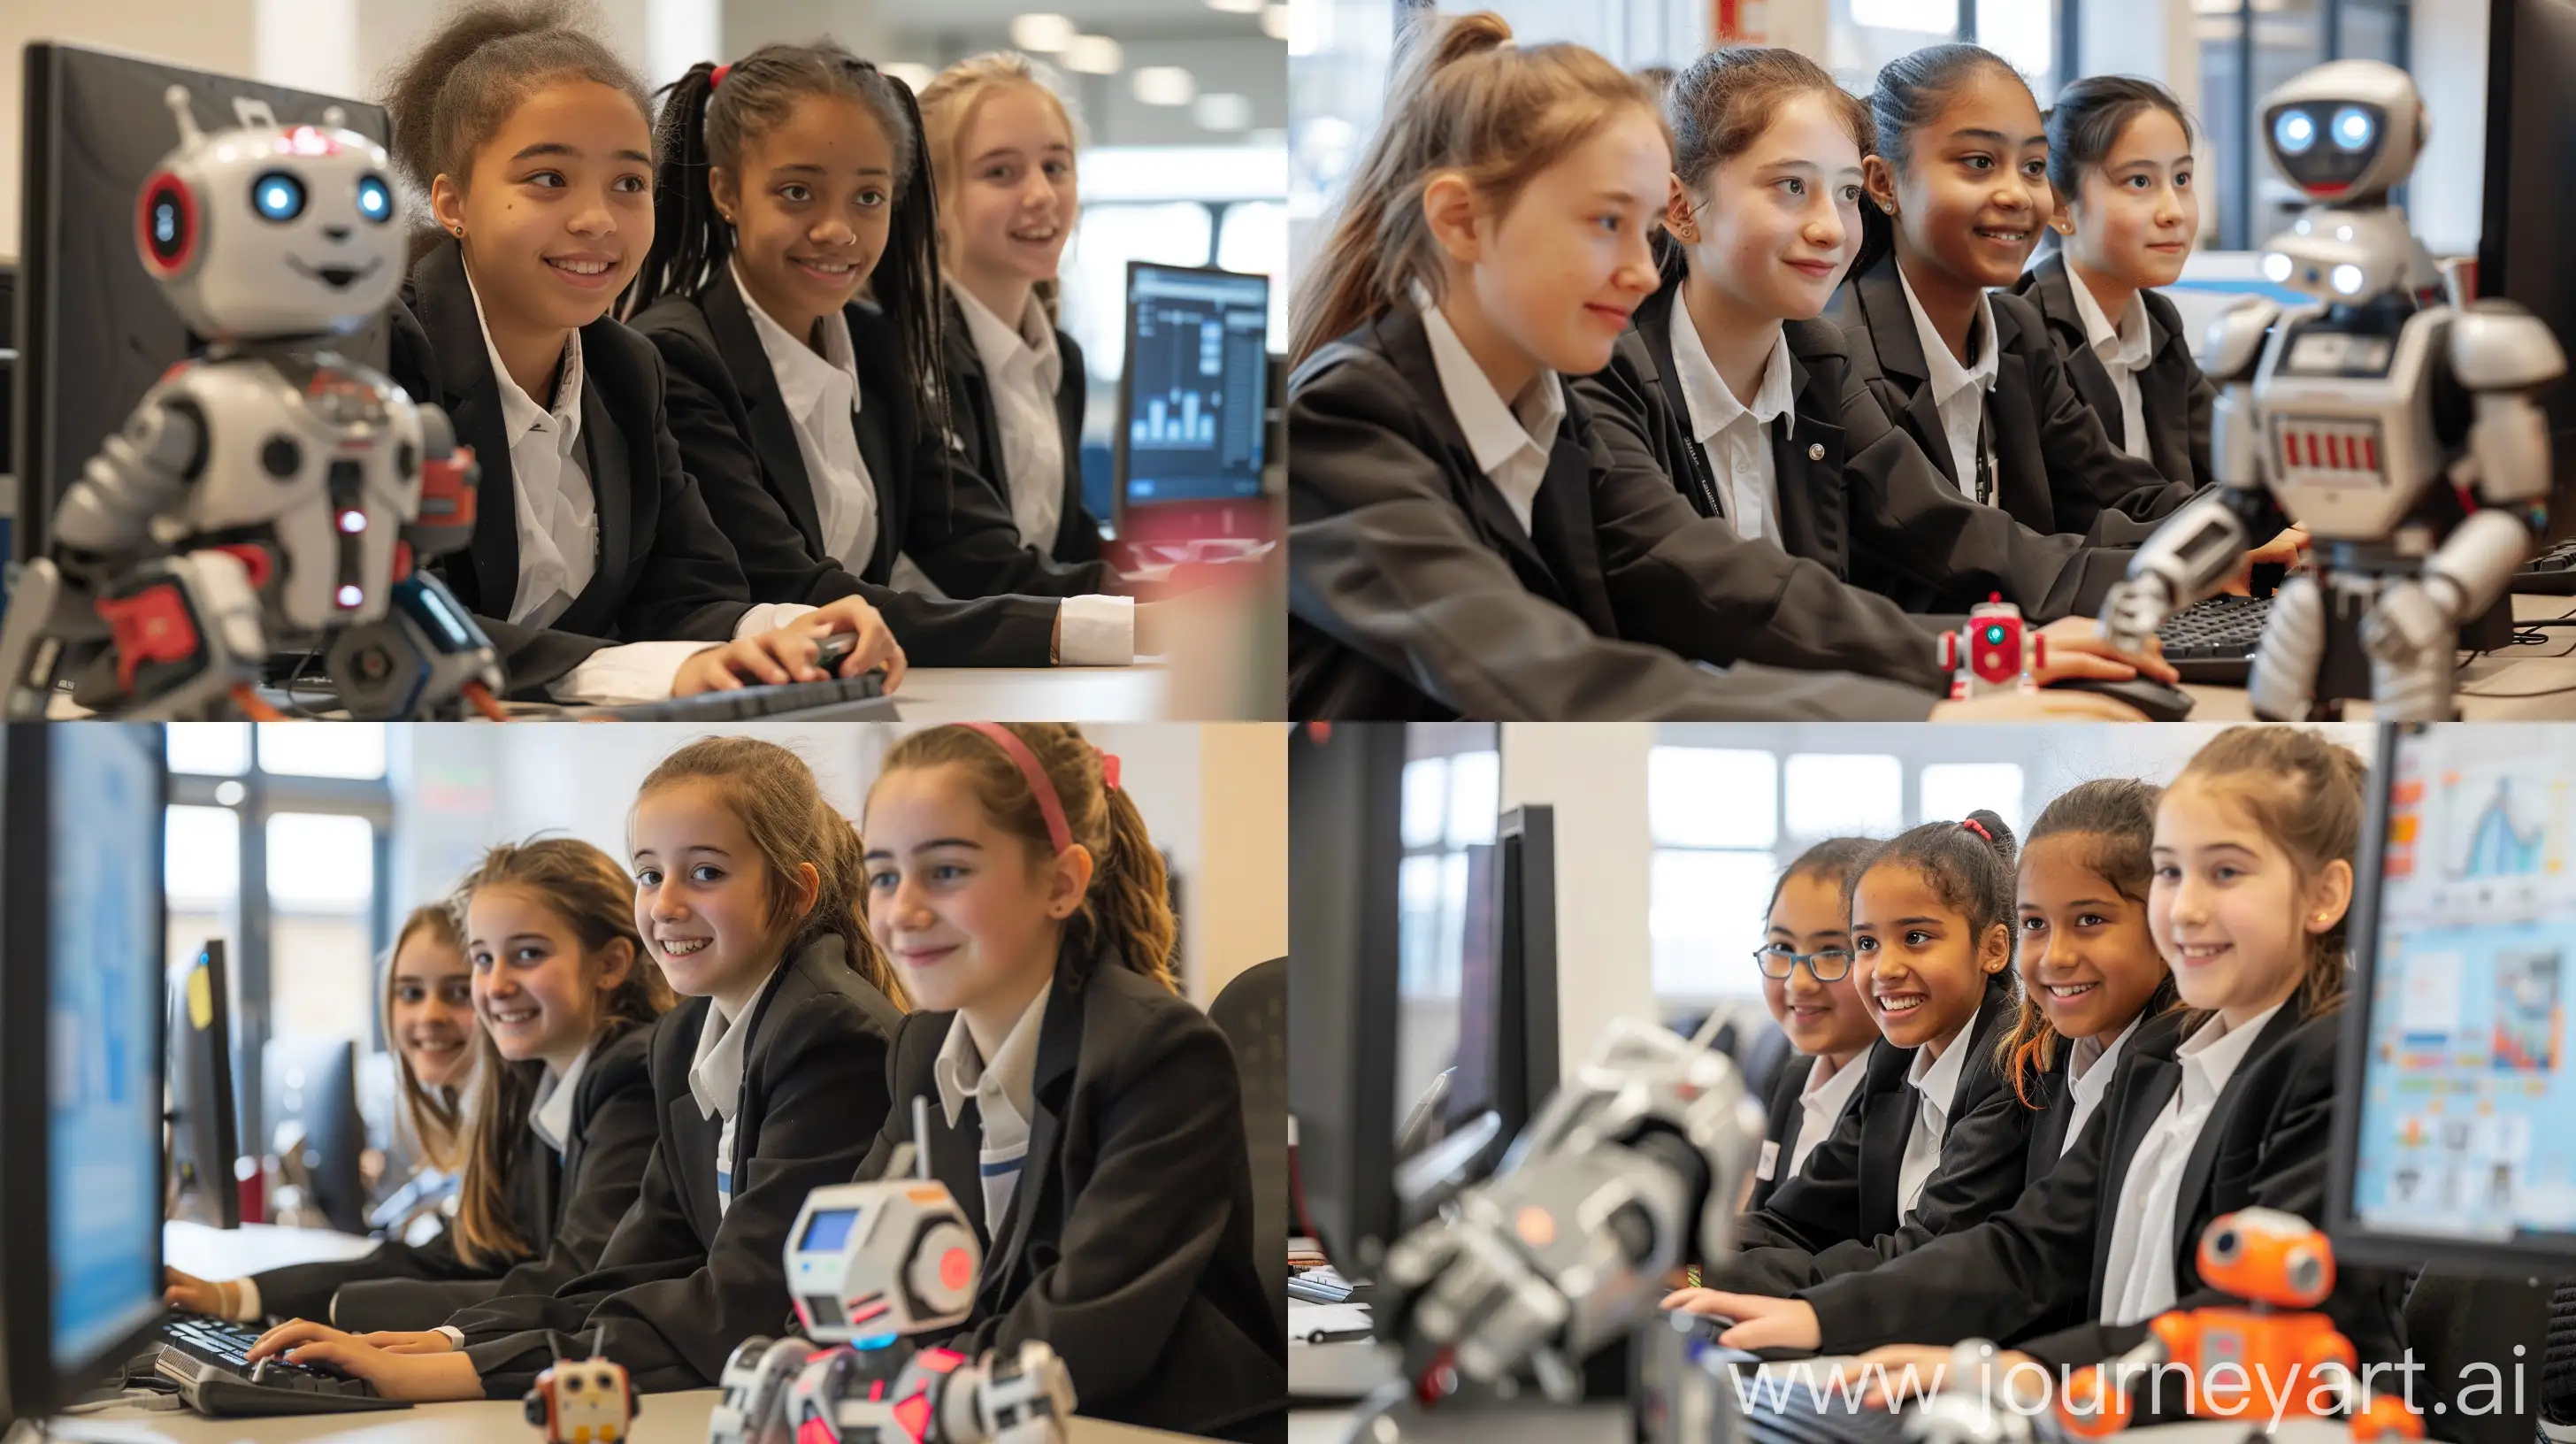 Three British high school girls in a black blazer and white shirt are sat at a computer, they look happy. There is a small toy robot next to them. --ar 16:9